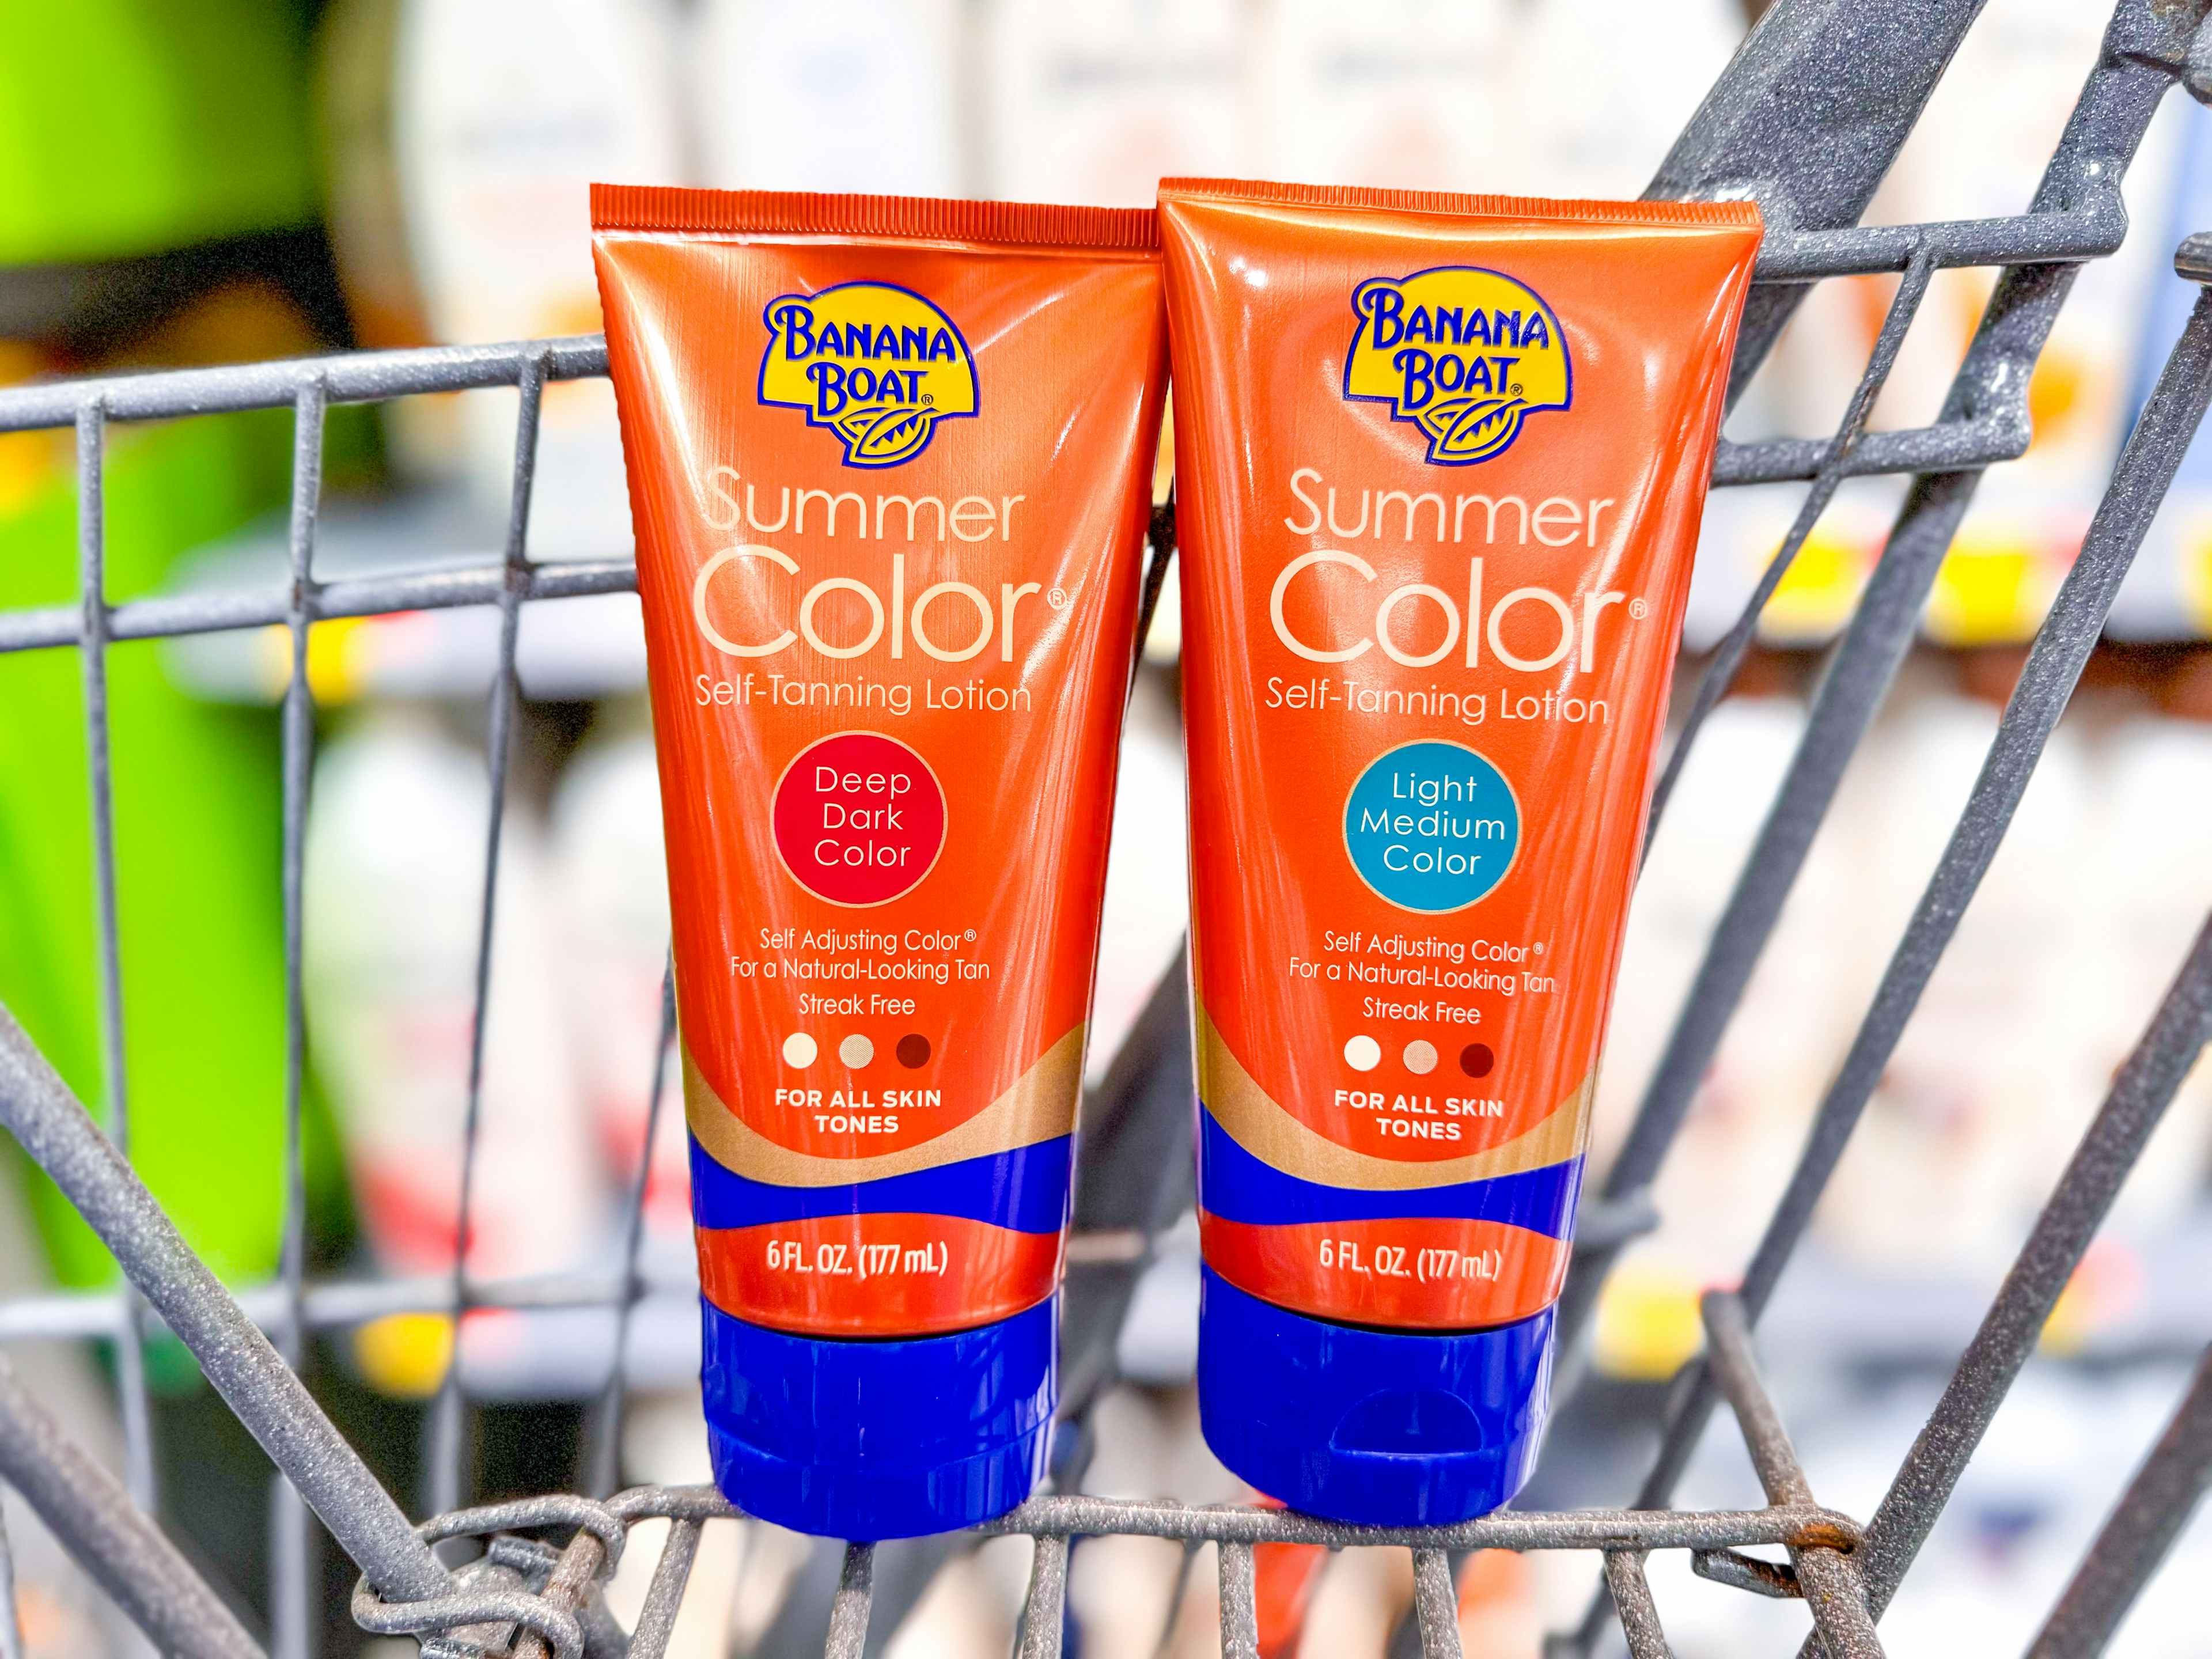 2 bottles of banana boat tanning lotion in a cart